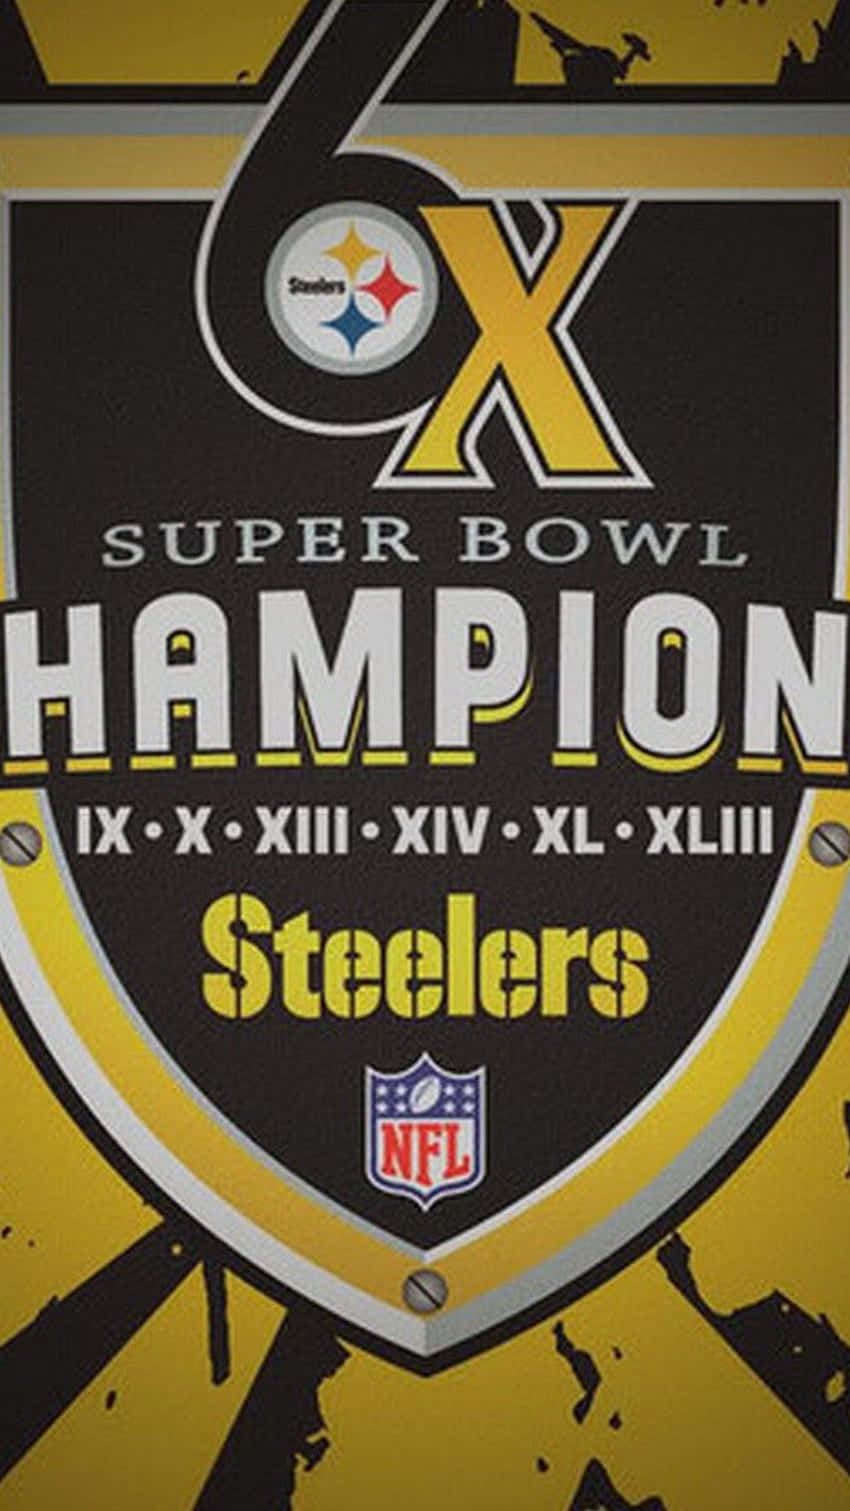 Show off the pride of being part of the Steeler Nation with this Steelers iPhone Wallpaper